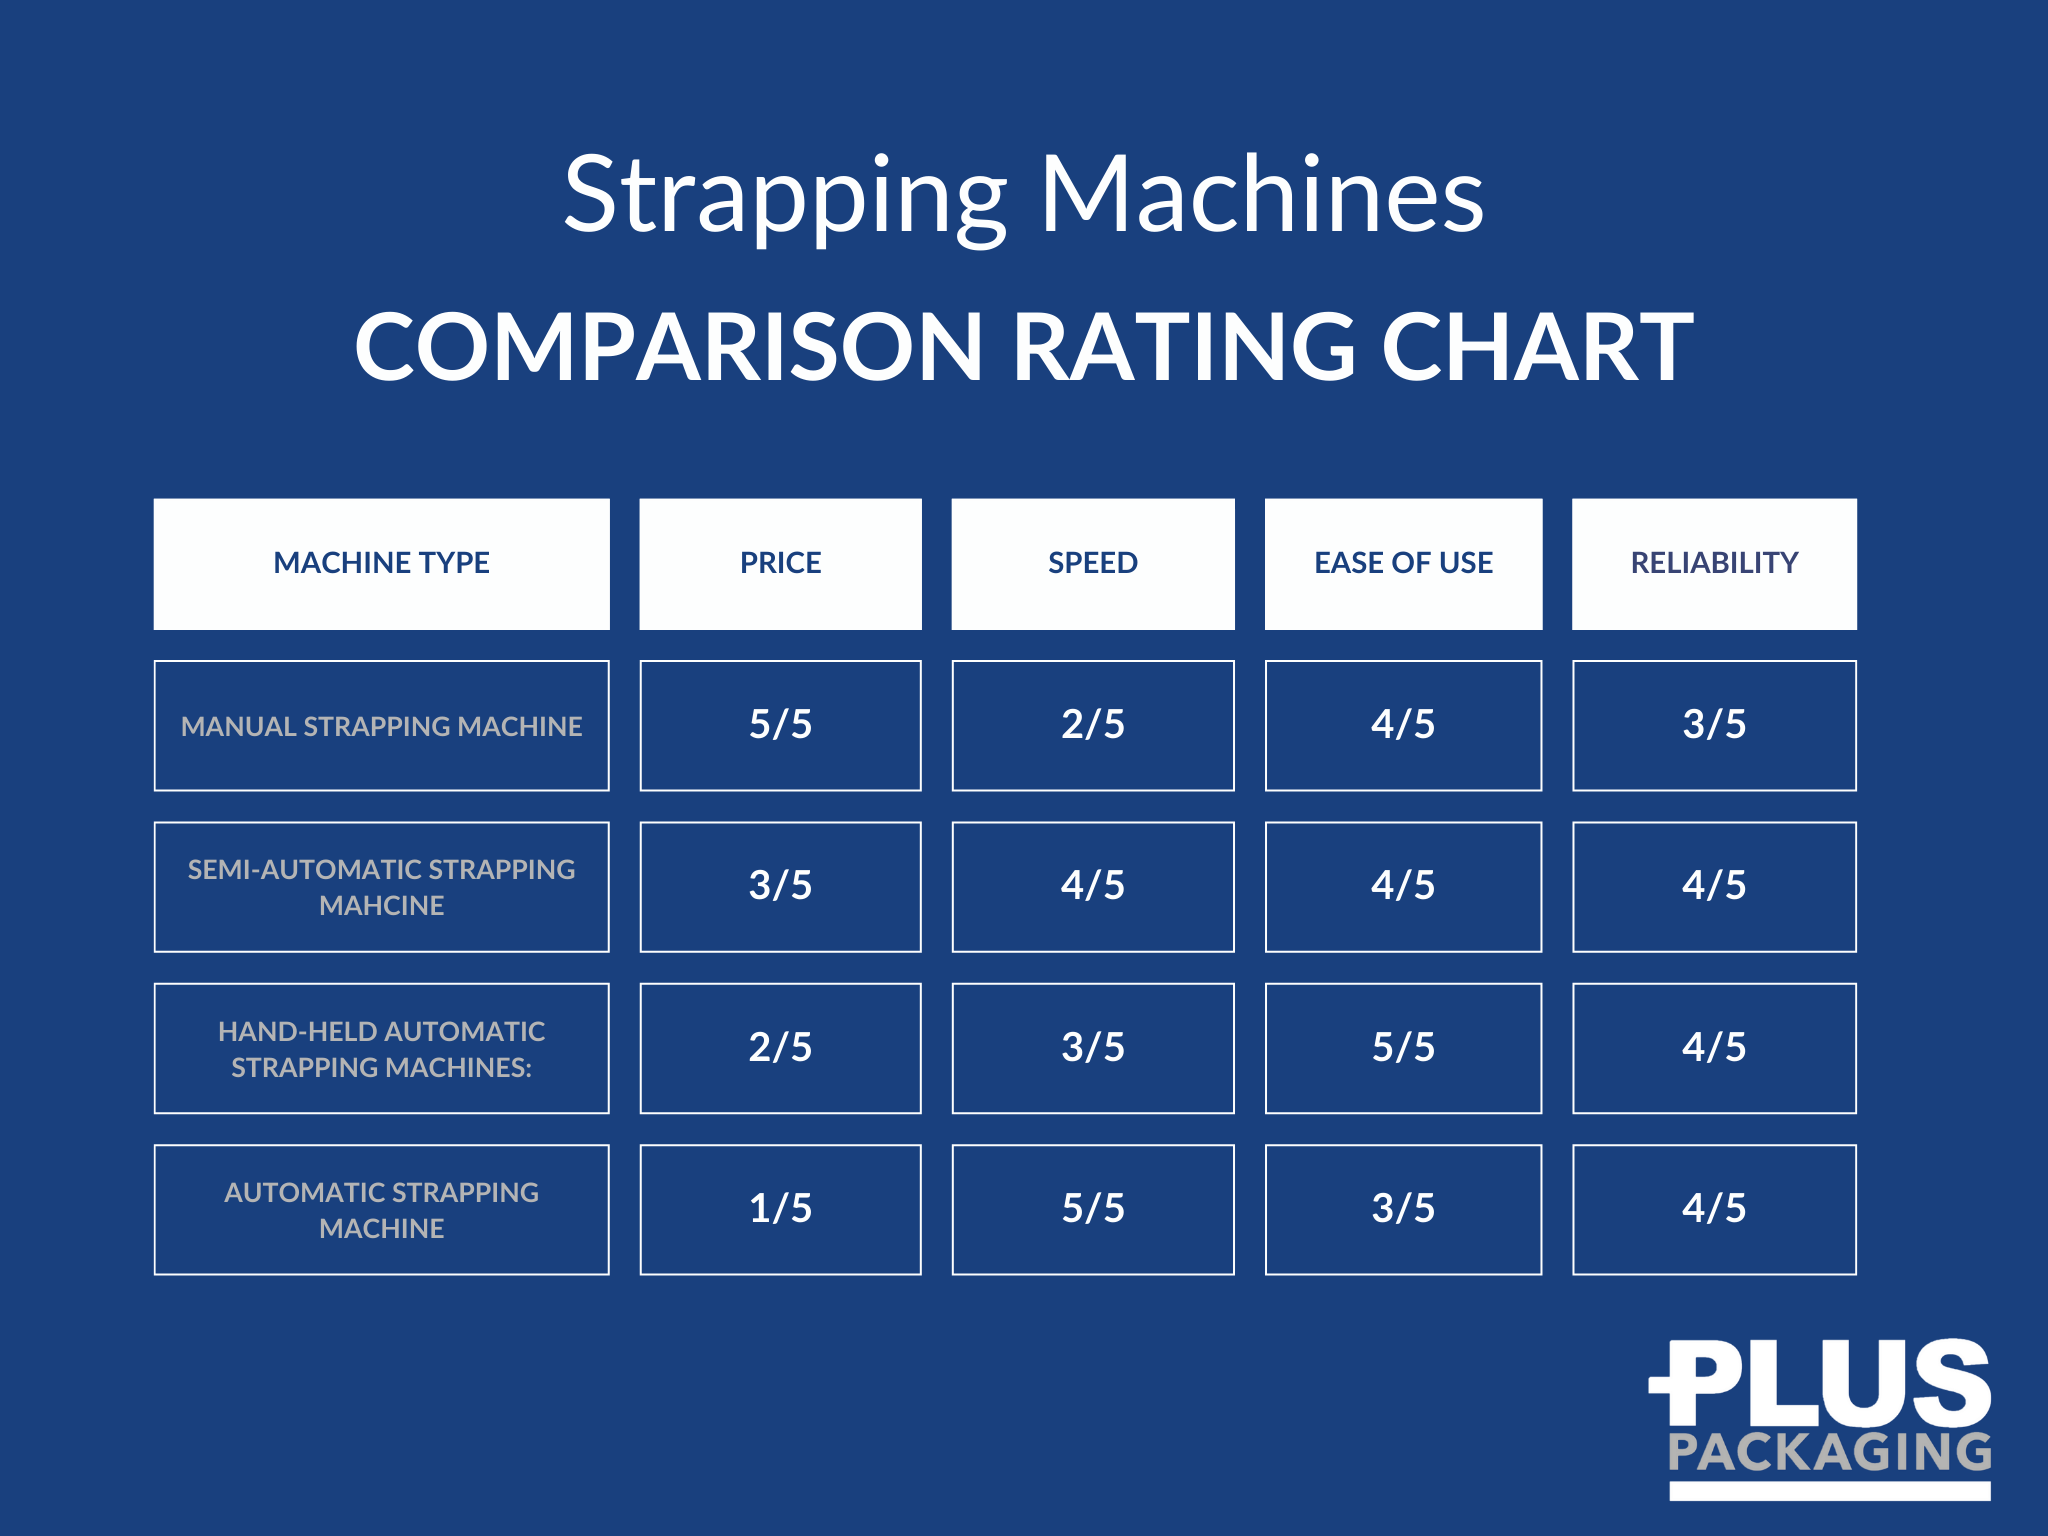 Strapping Machines Comparison Rating Chart